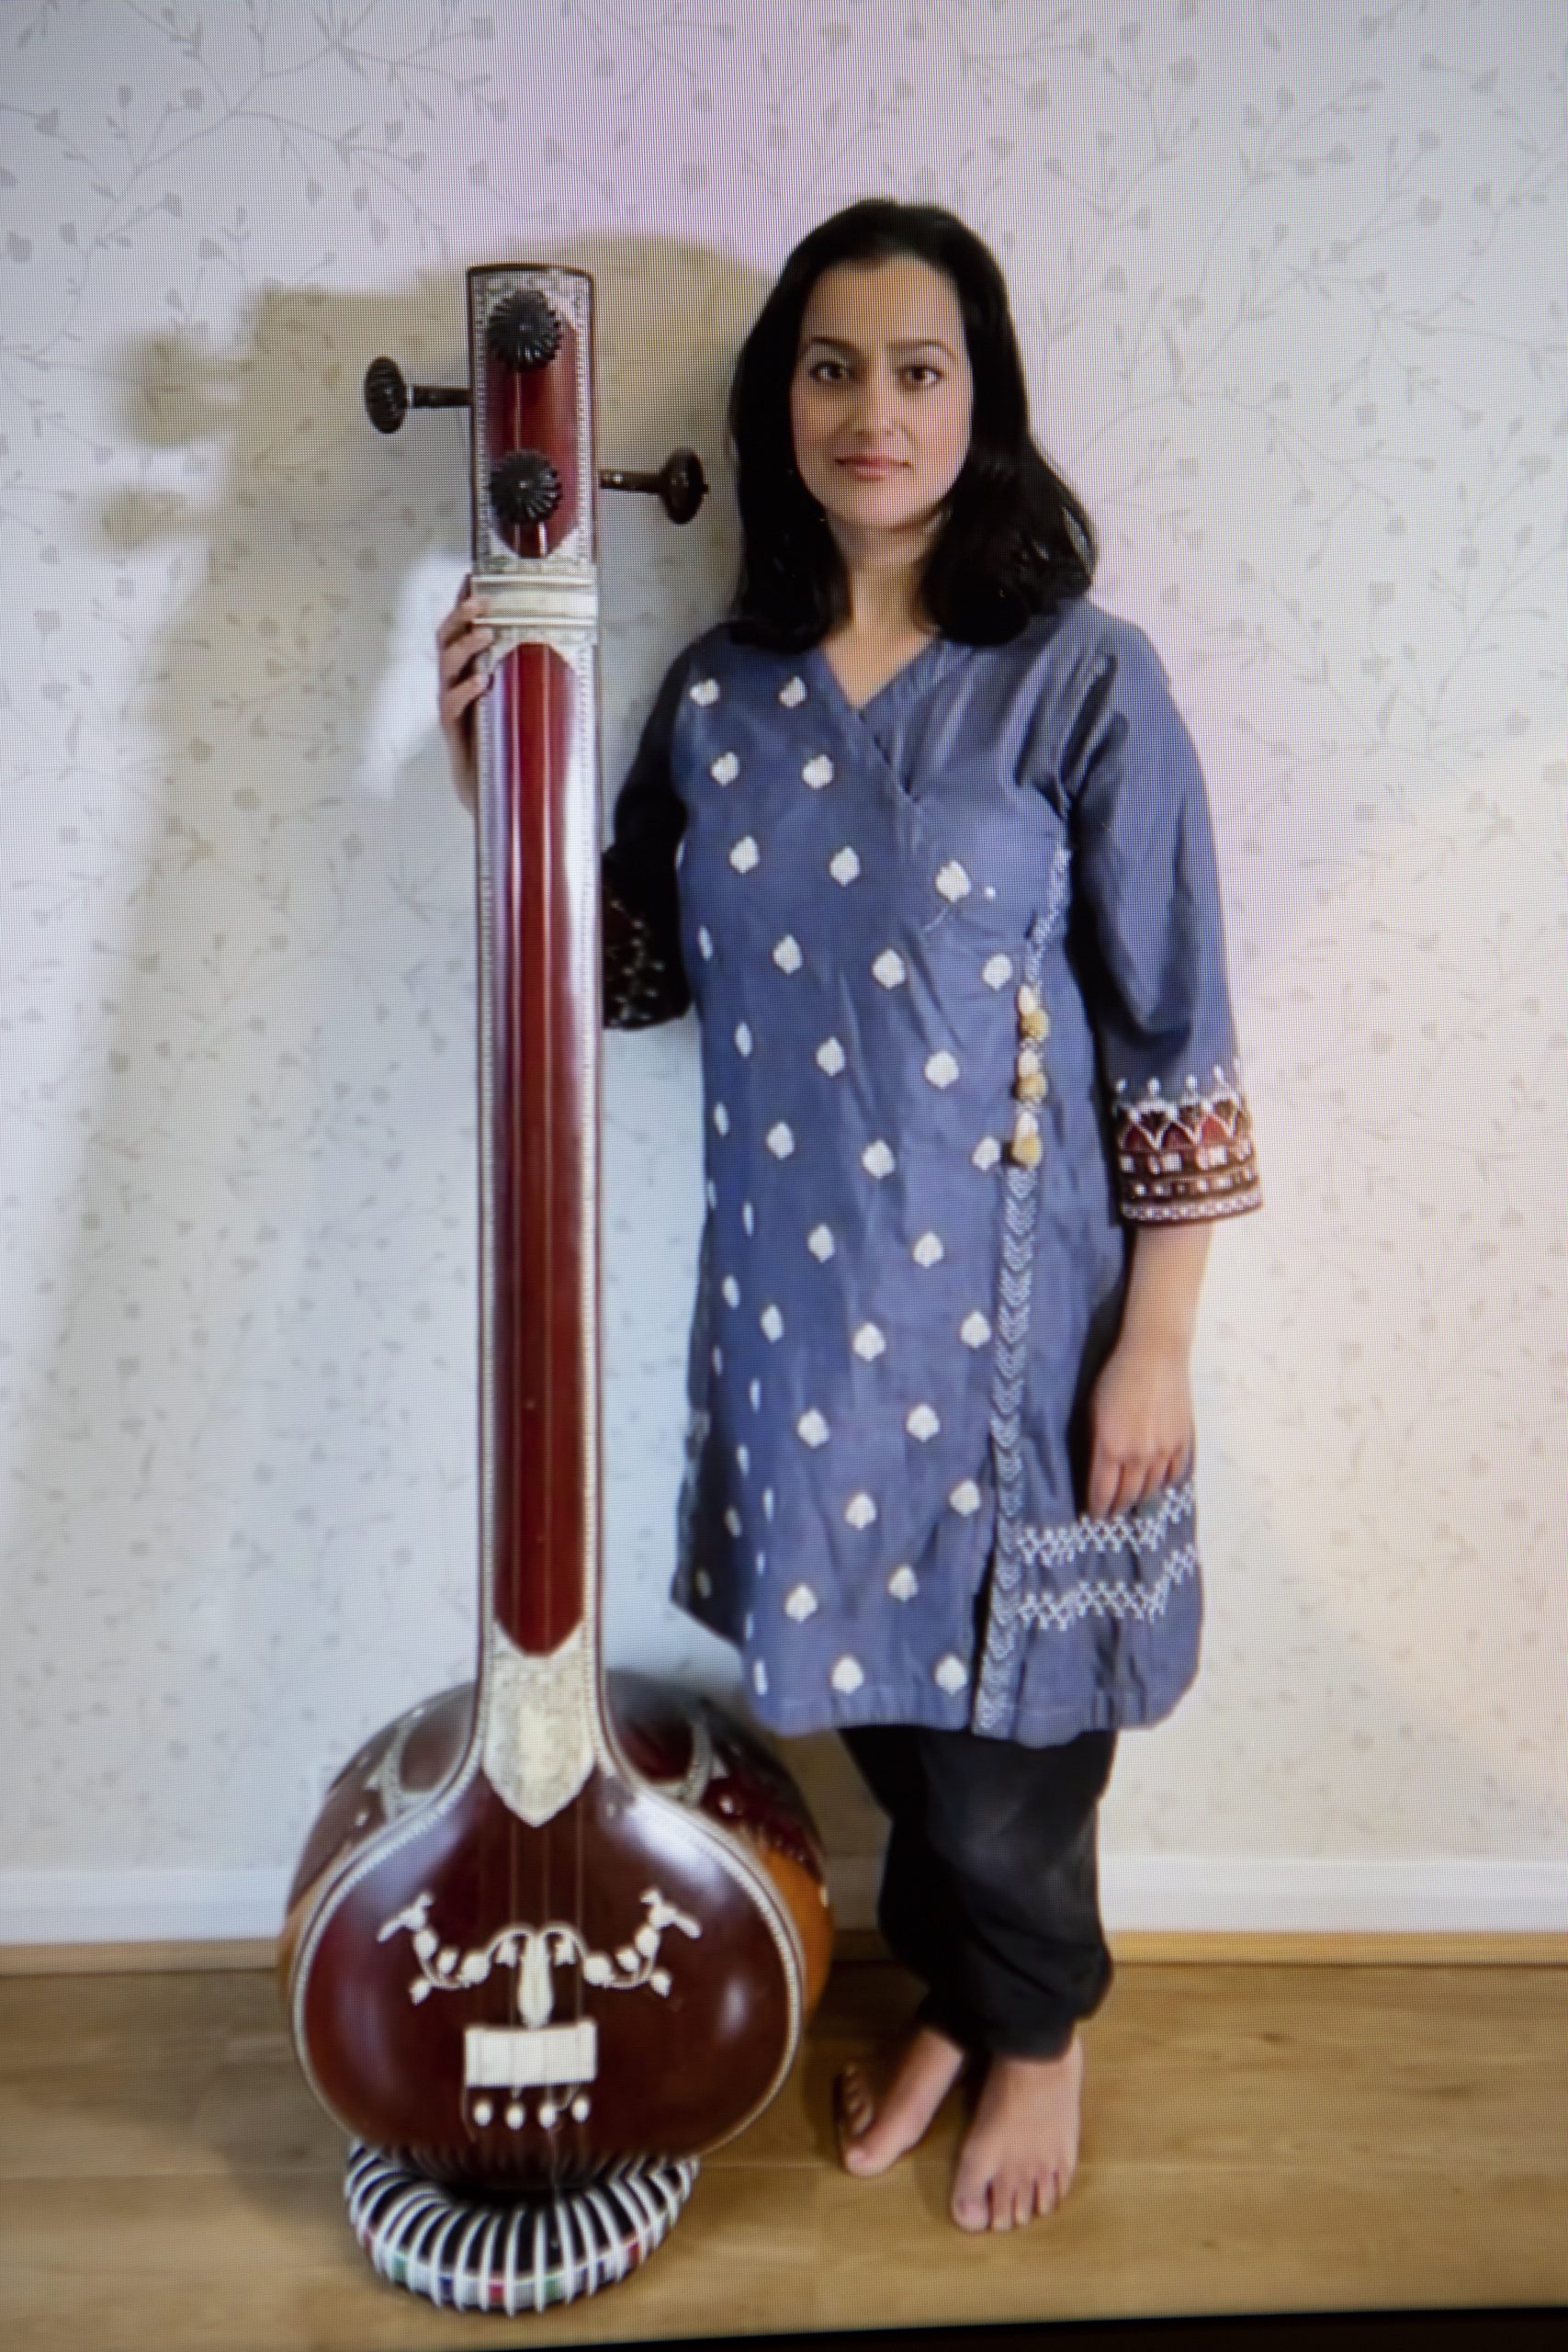 Sonia stands in the middle of the image, her full body visible. She is barefoot and wears a cornflower blue kurti with white embroidery on the front, she also wears black trousers which are visible from her knee to her ankle. Sonia is looking into the camera and smiling and her face is framed by dark shoulder length hair. To her left, she holds an upright sitar.